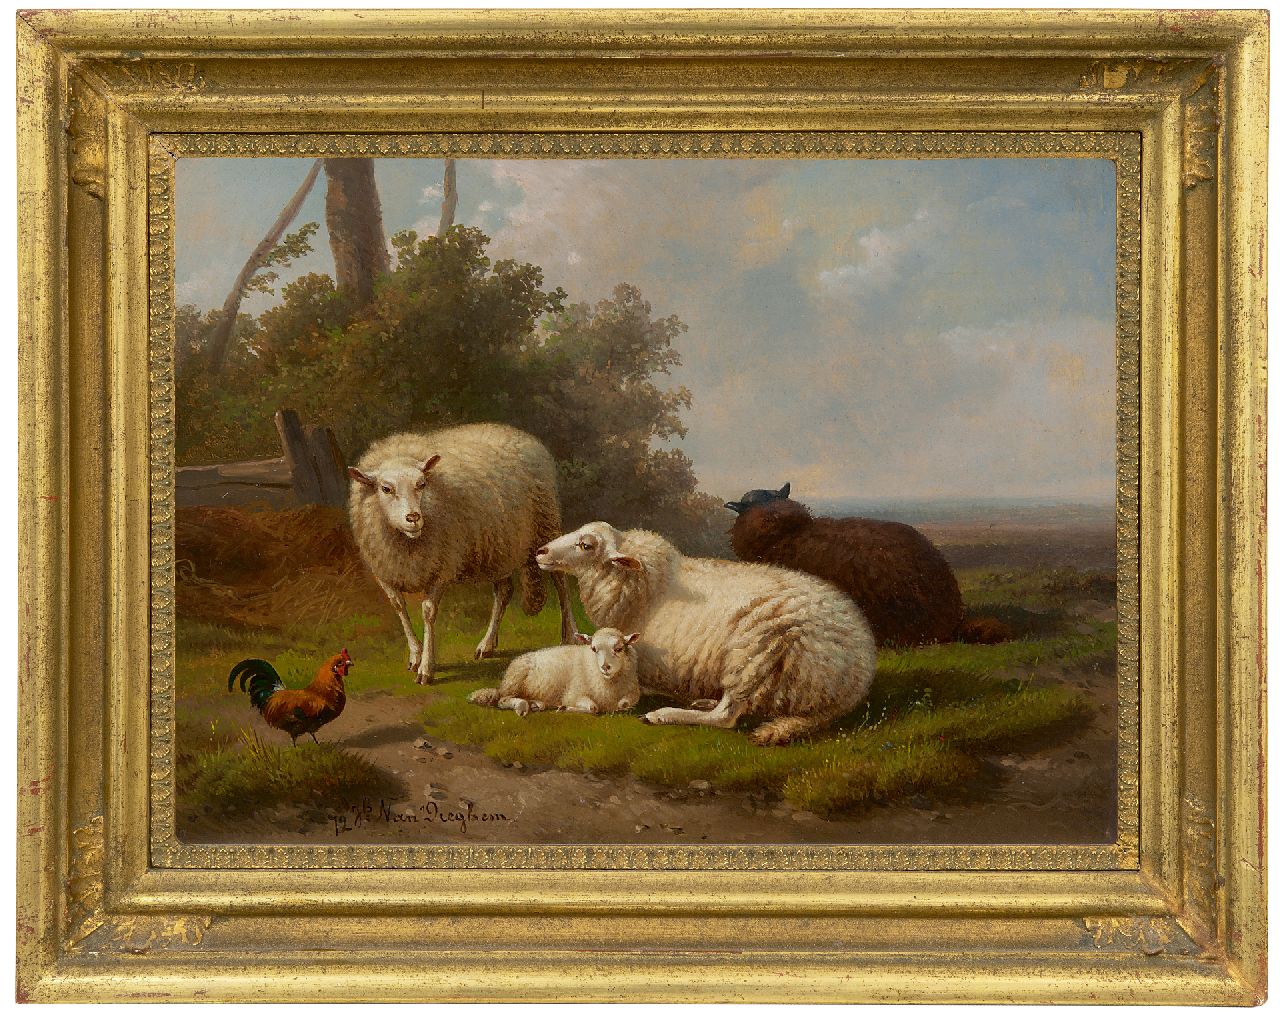 Dieghem J. van | Joseph van Dieghem | Paintings offered for sale | An idyllic landscape with sheep, oil on panel 22.6 x 31.0 cm, signed l.l. and dated '72